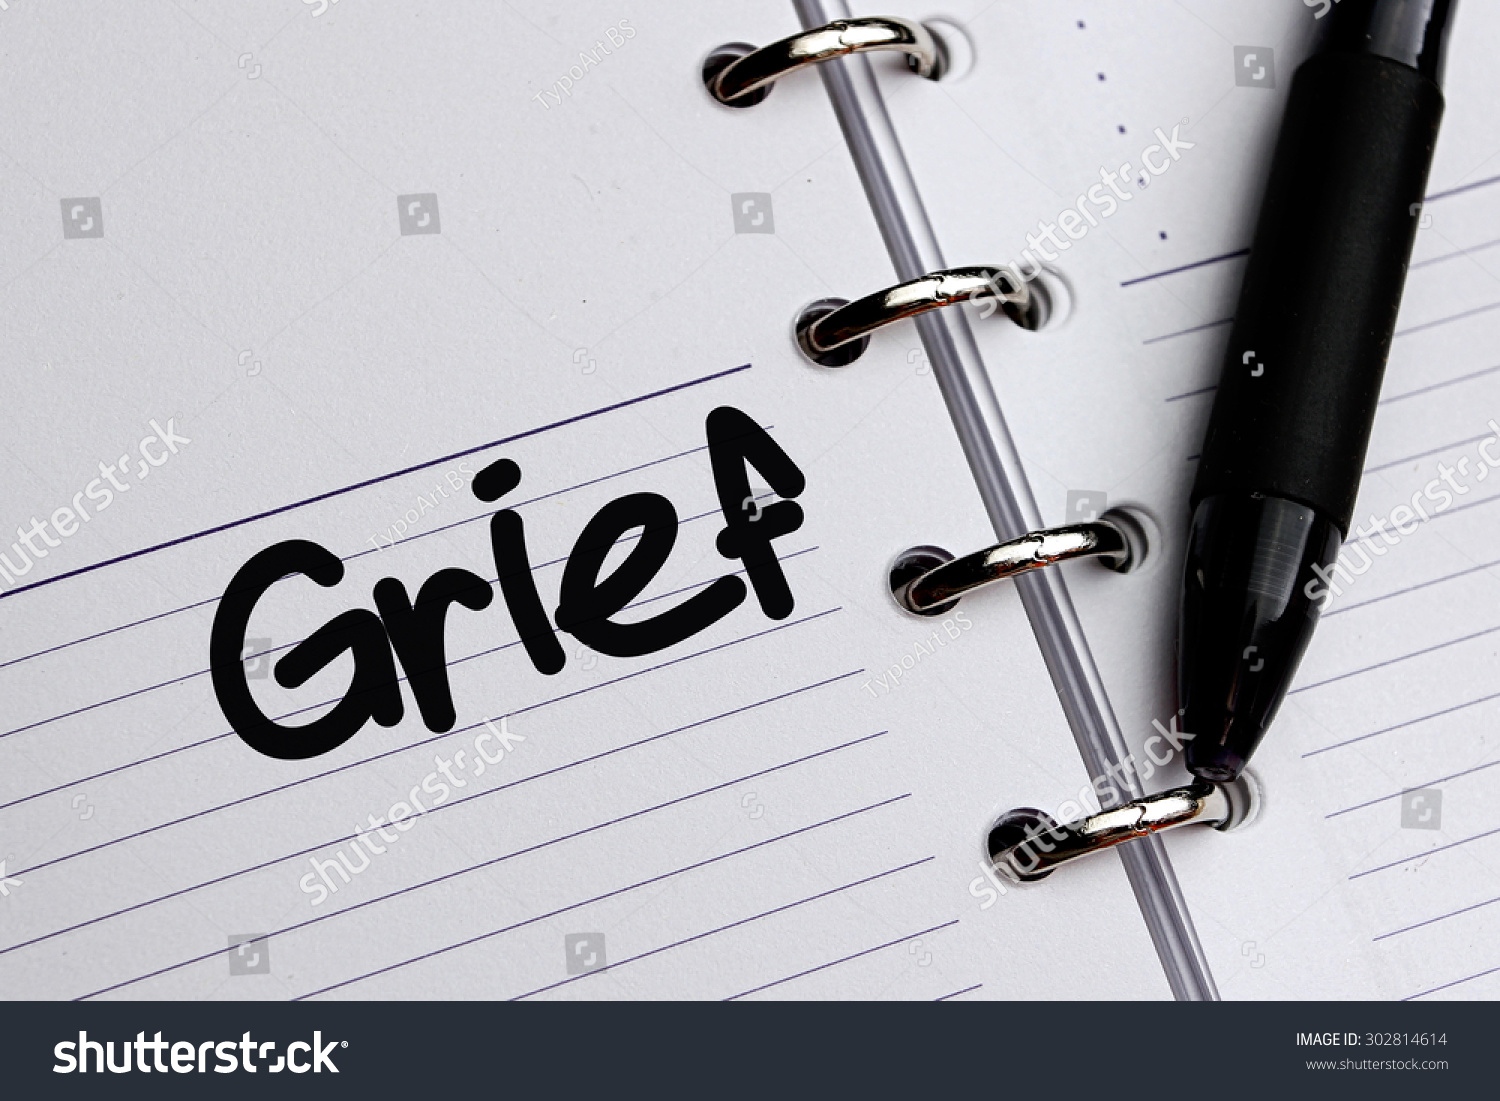 Grief Word Written On Notebook Stock Photo Edit Now